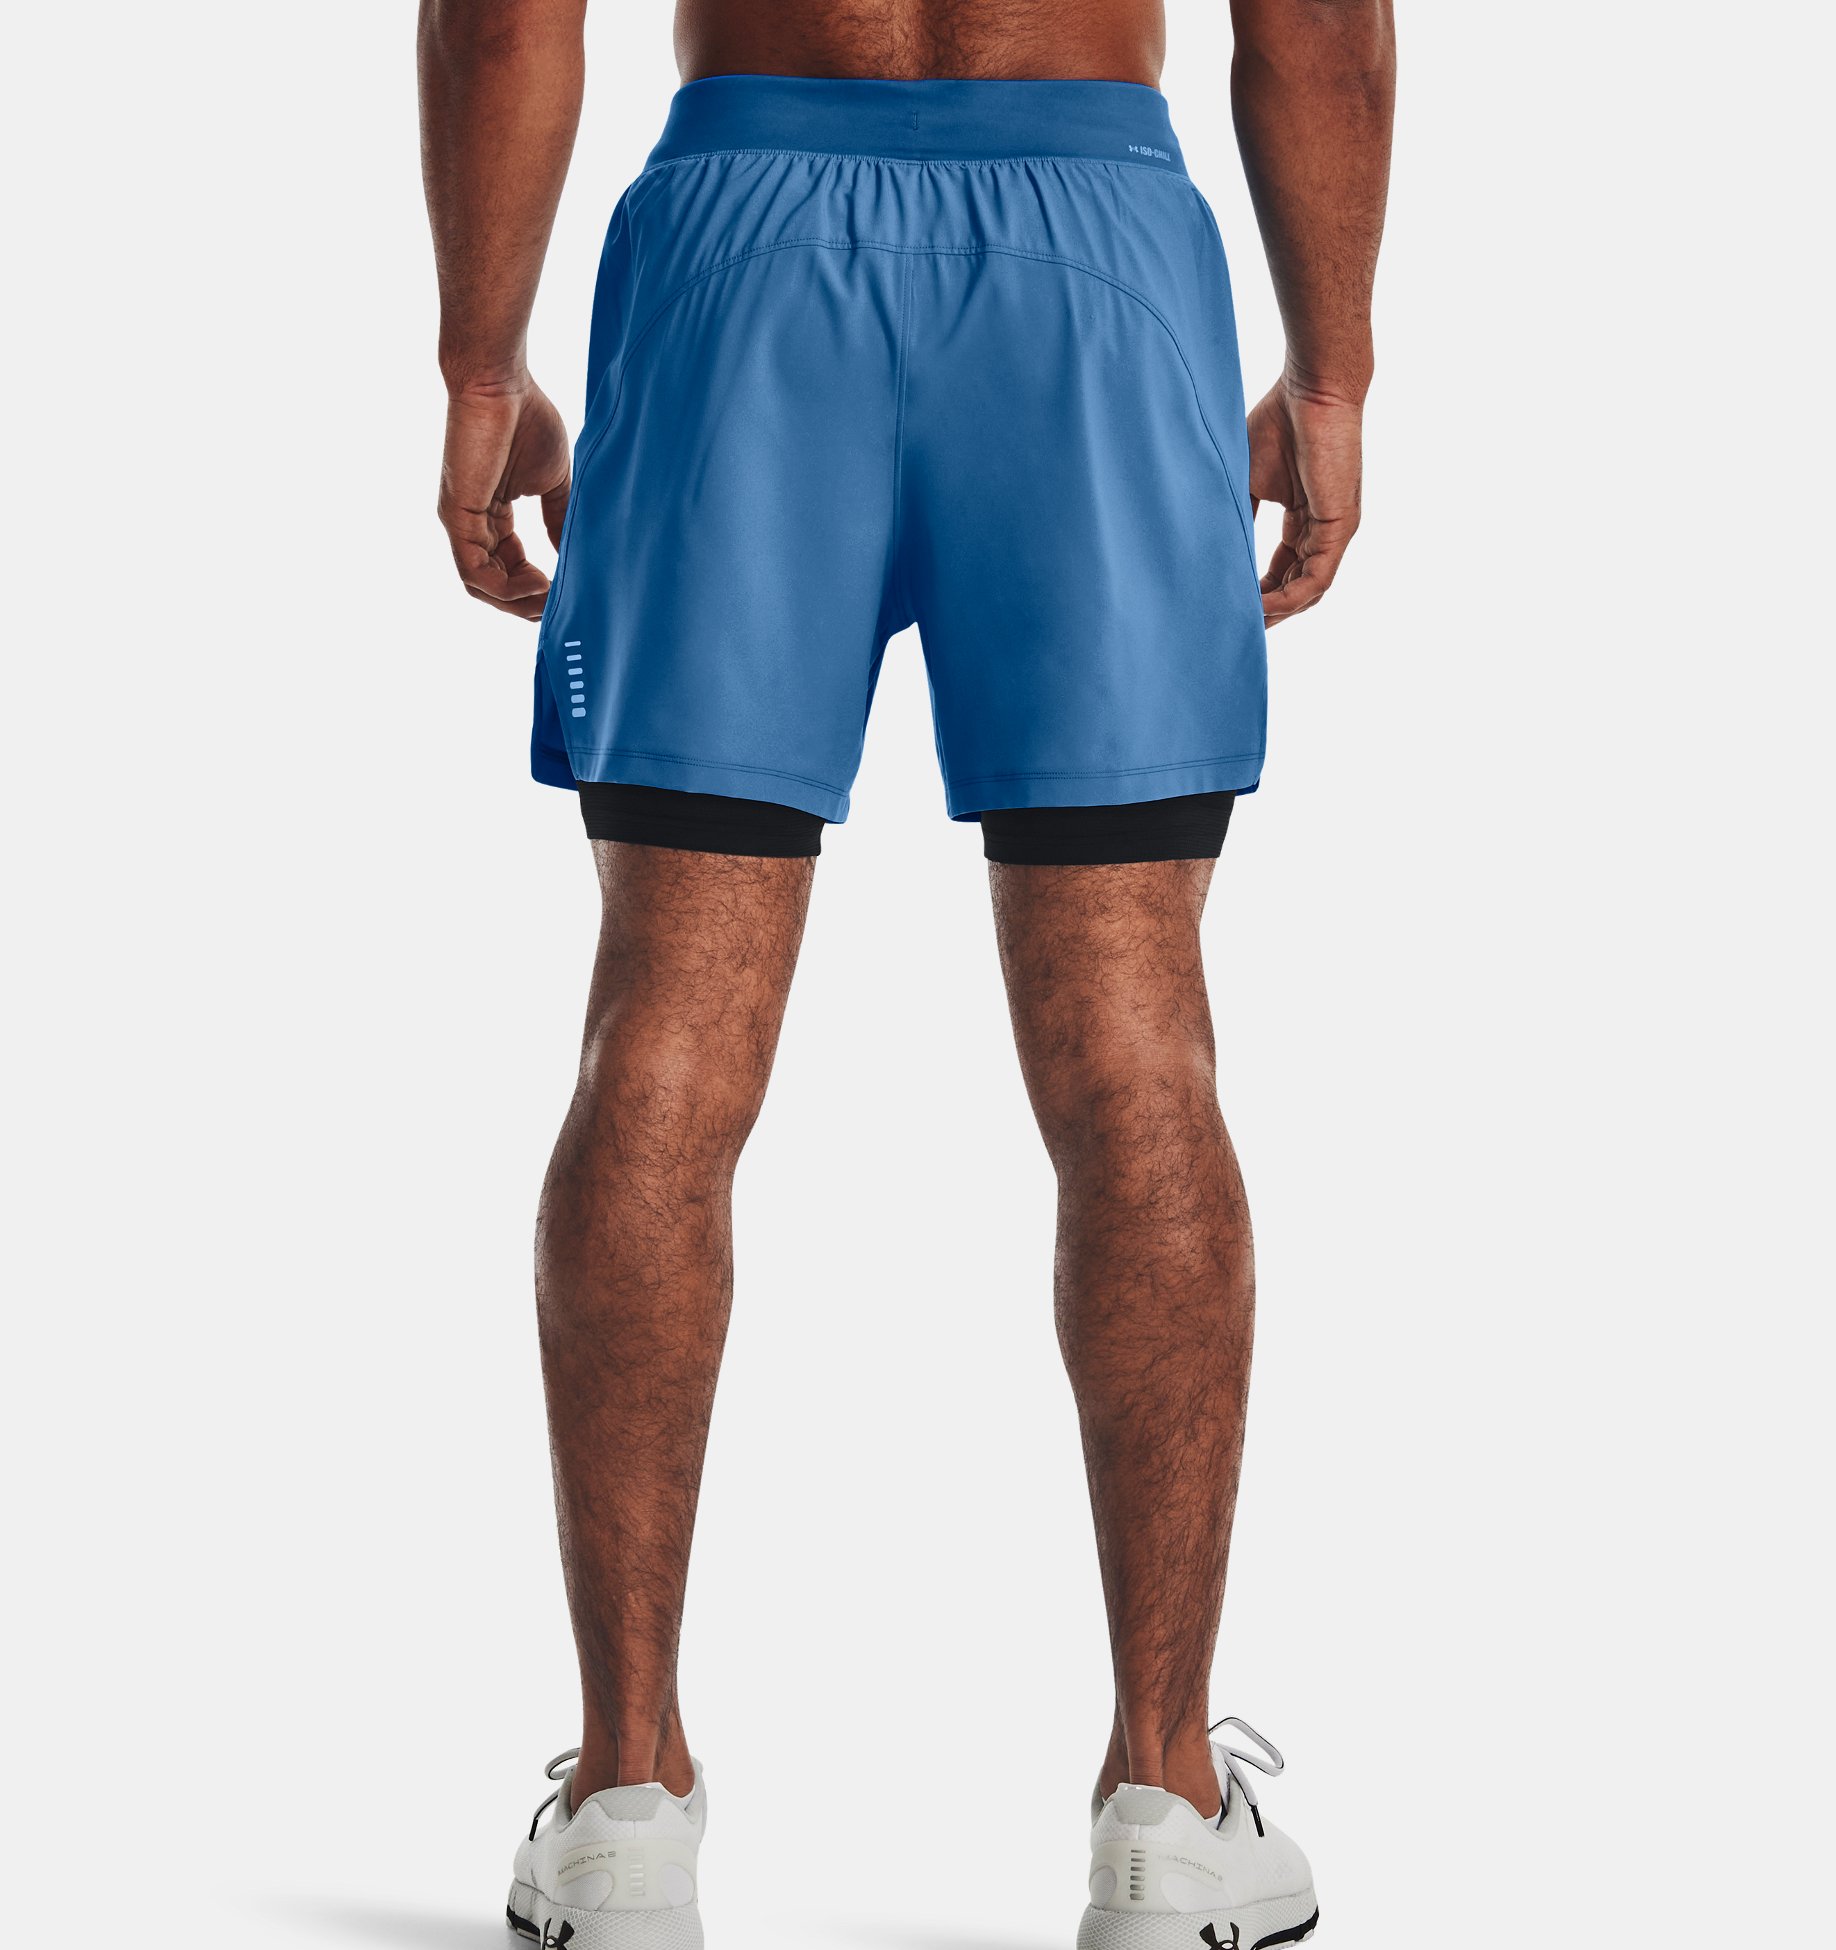 BLUE CHILL Running Shorts for Men Athletic Gym Workout Yoga Basketball Clothes Board Swim Trunks 2 in 1 Training Shorts